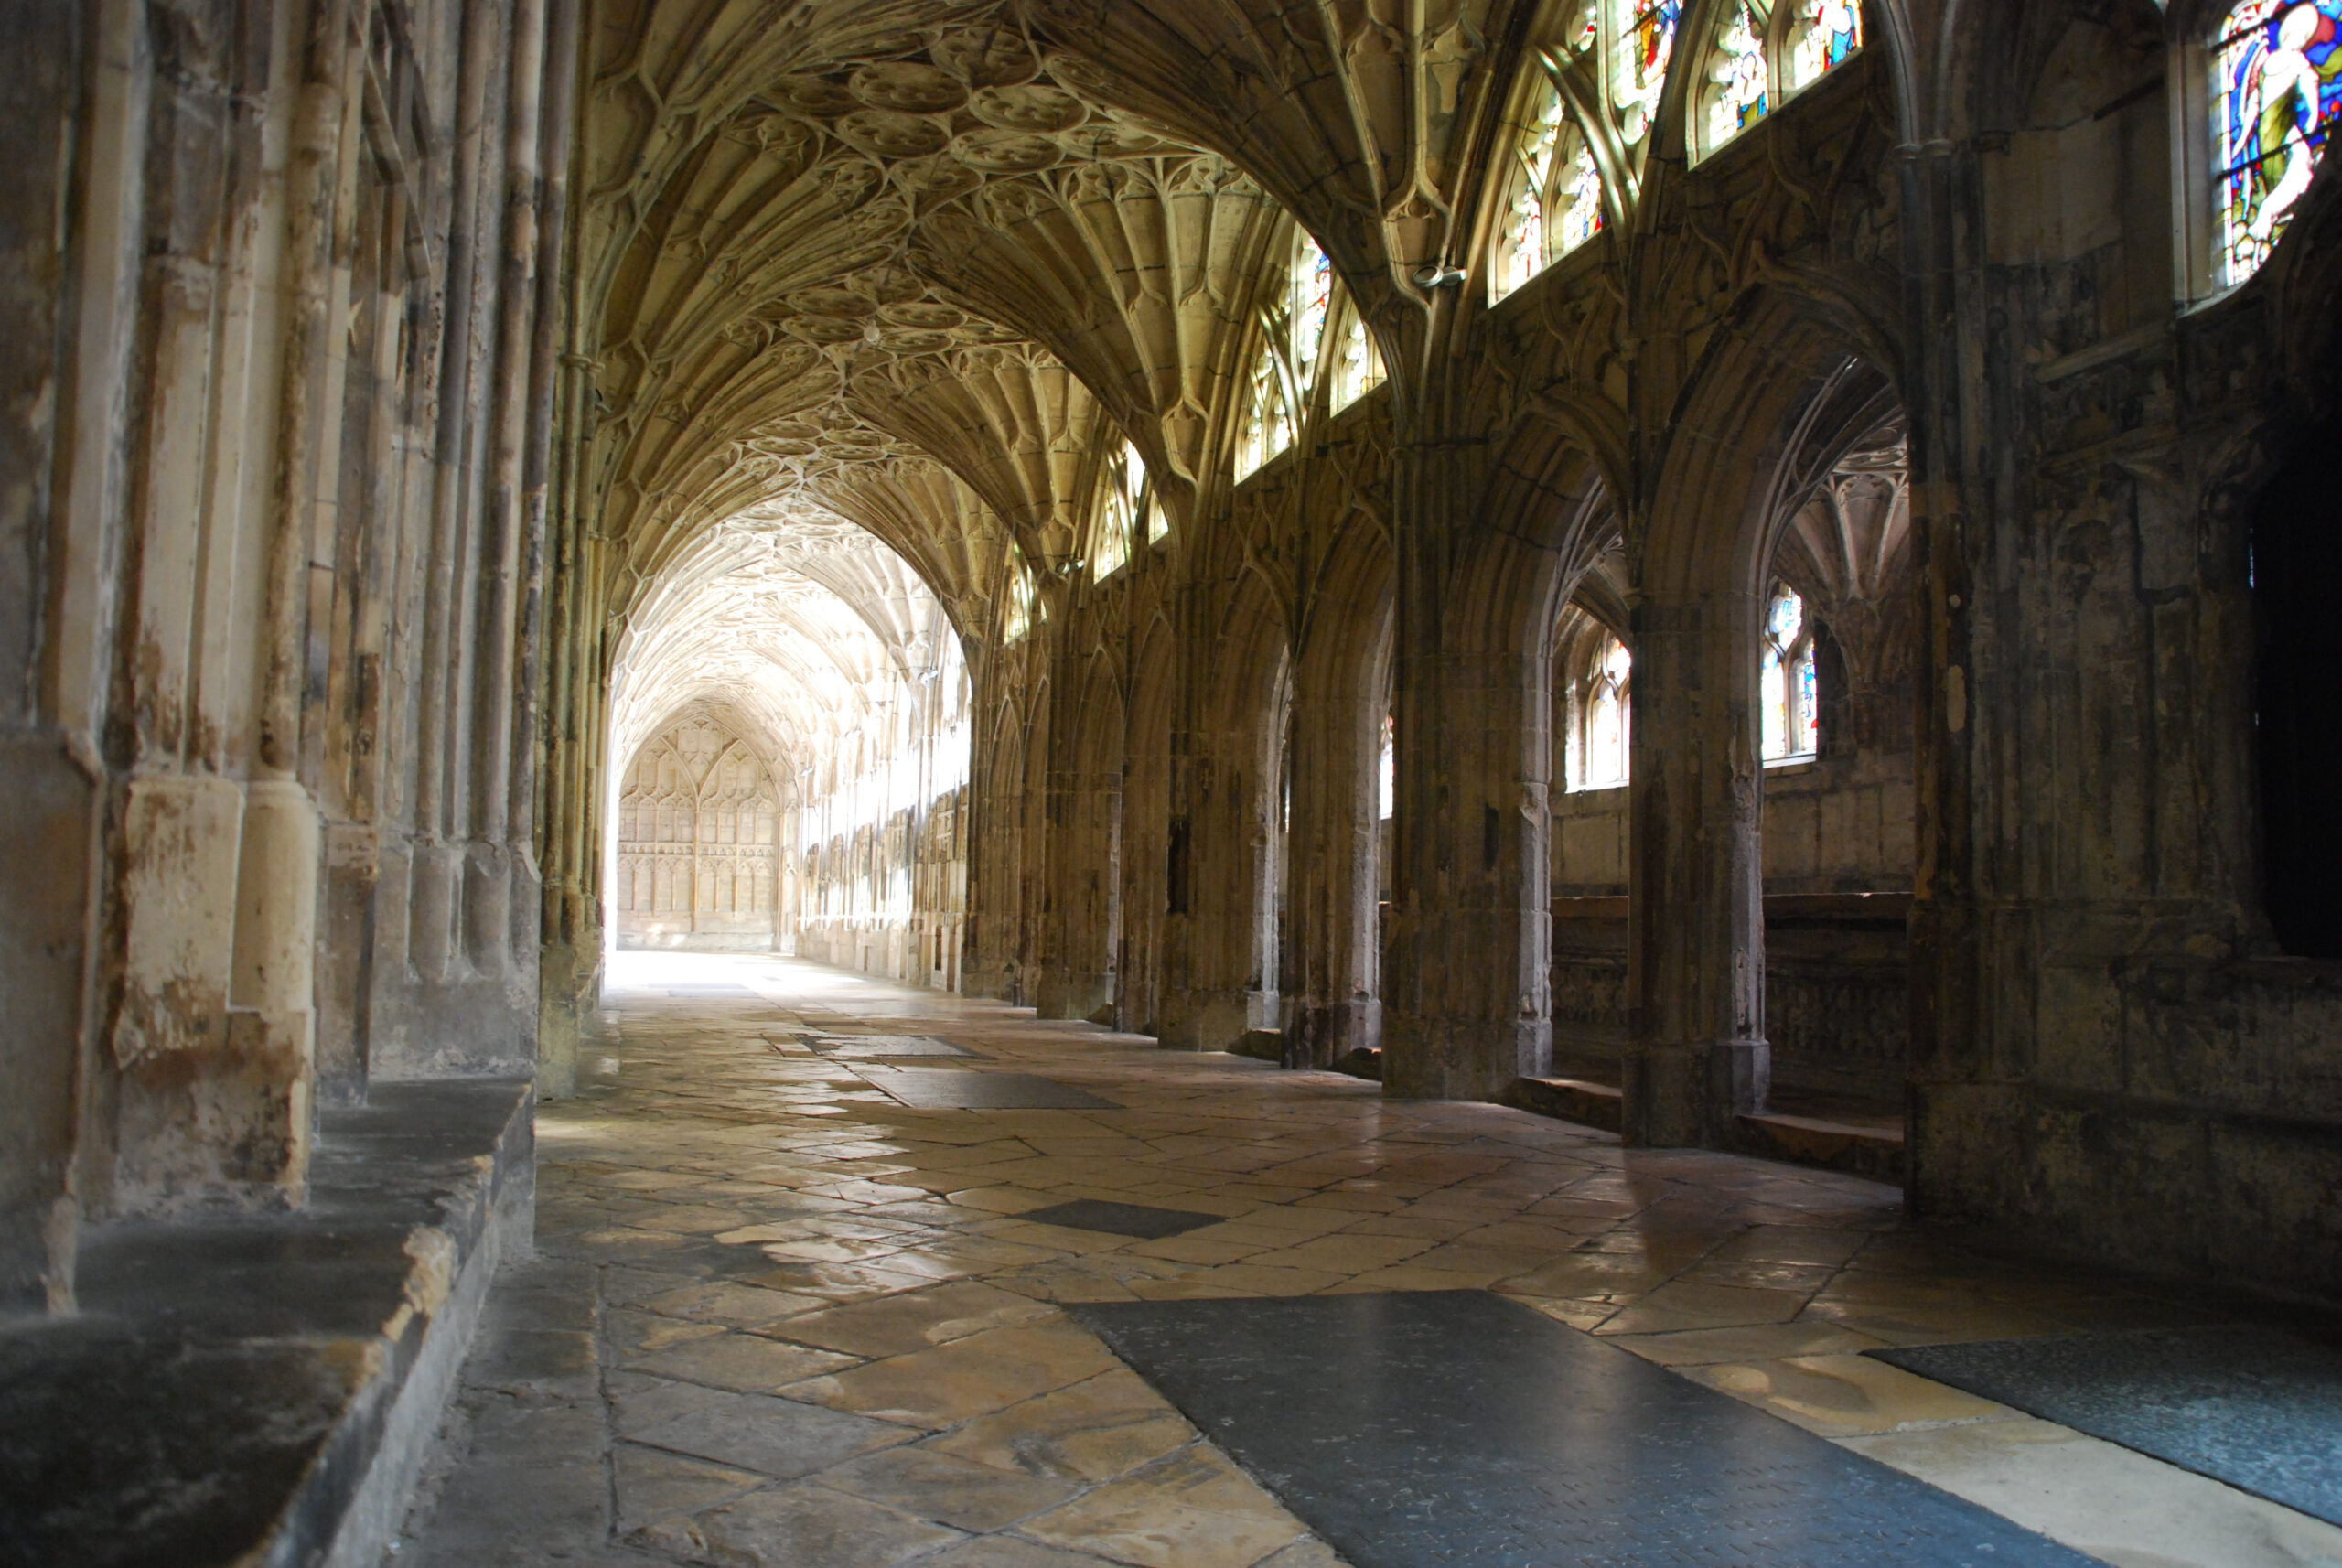 the cloister in gloucester cathedral fy5hEJAu scaled